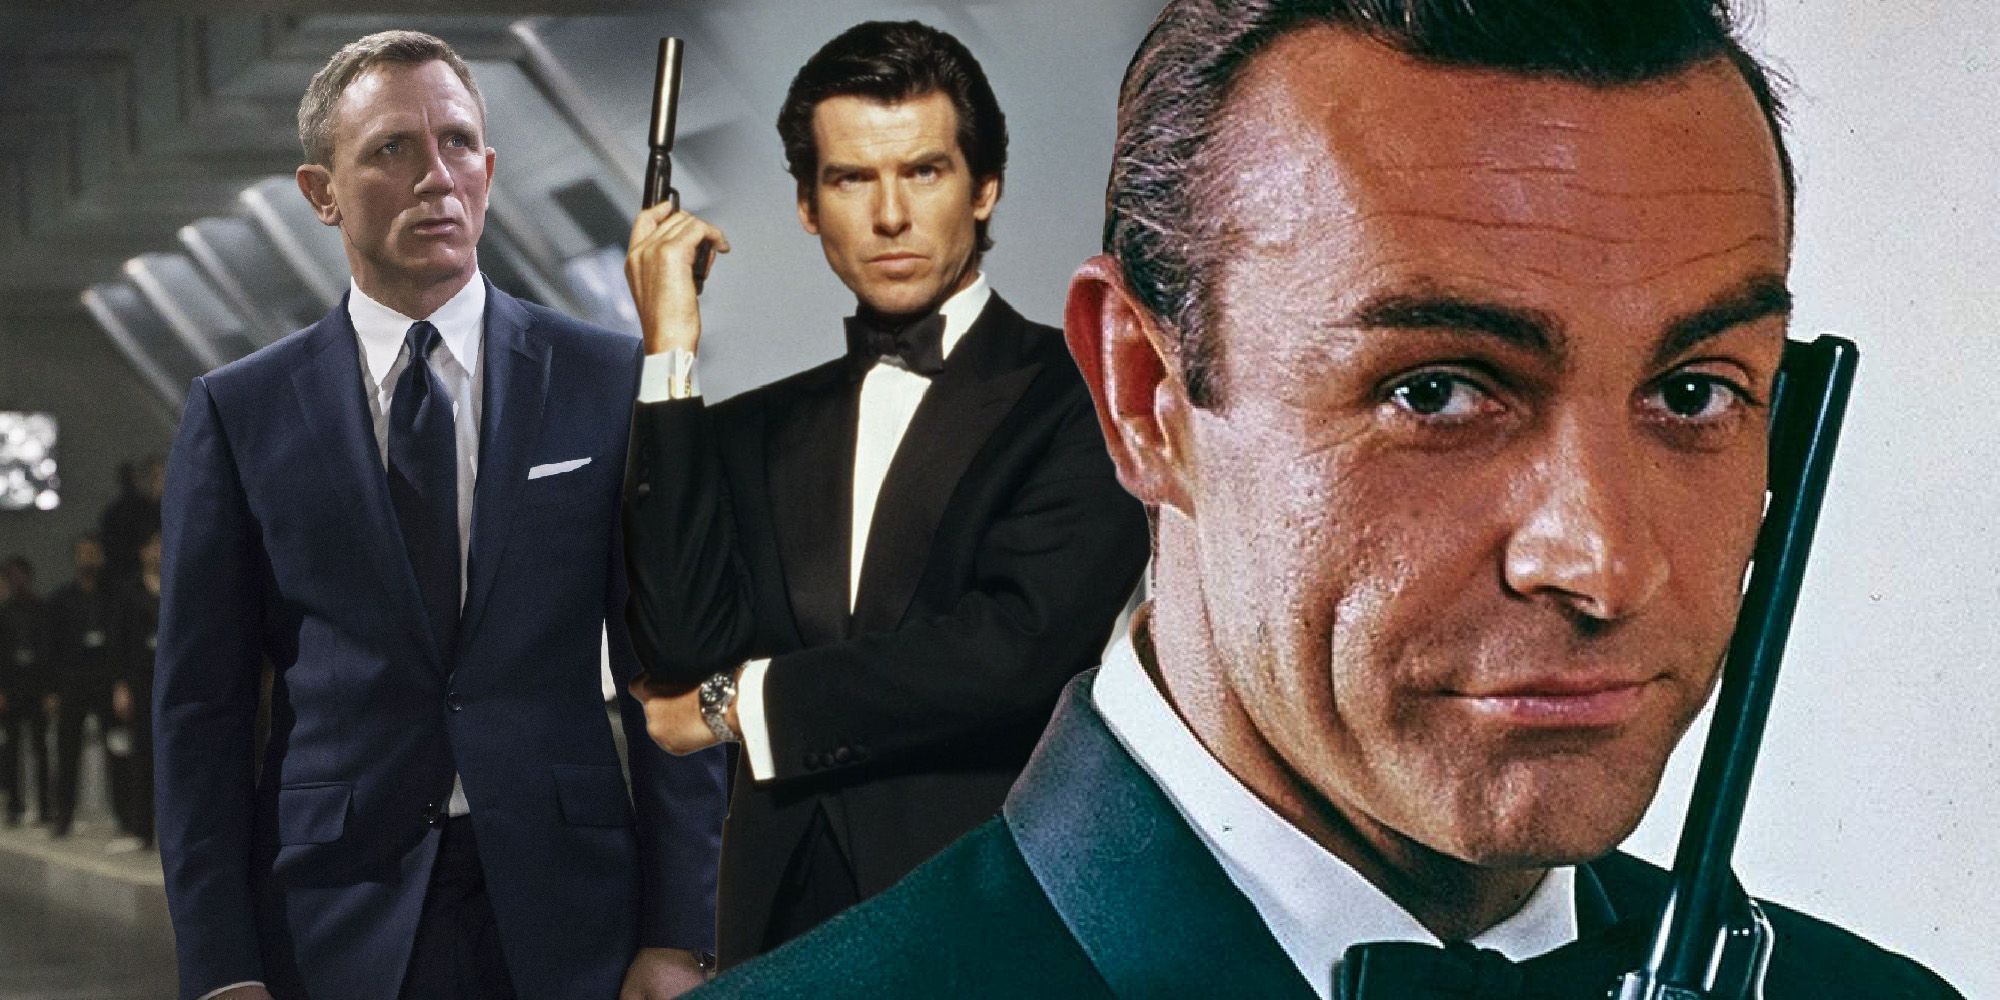 James Bond 26 Needs An Unknown Actor For 007 After Daniel Craig